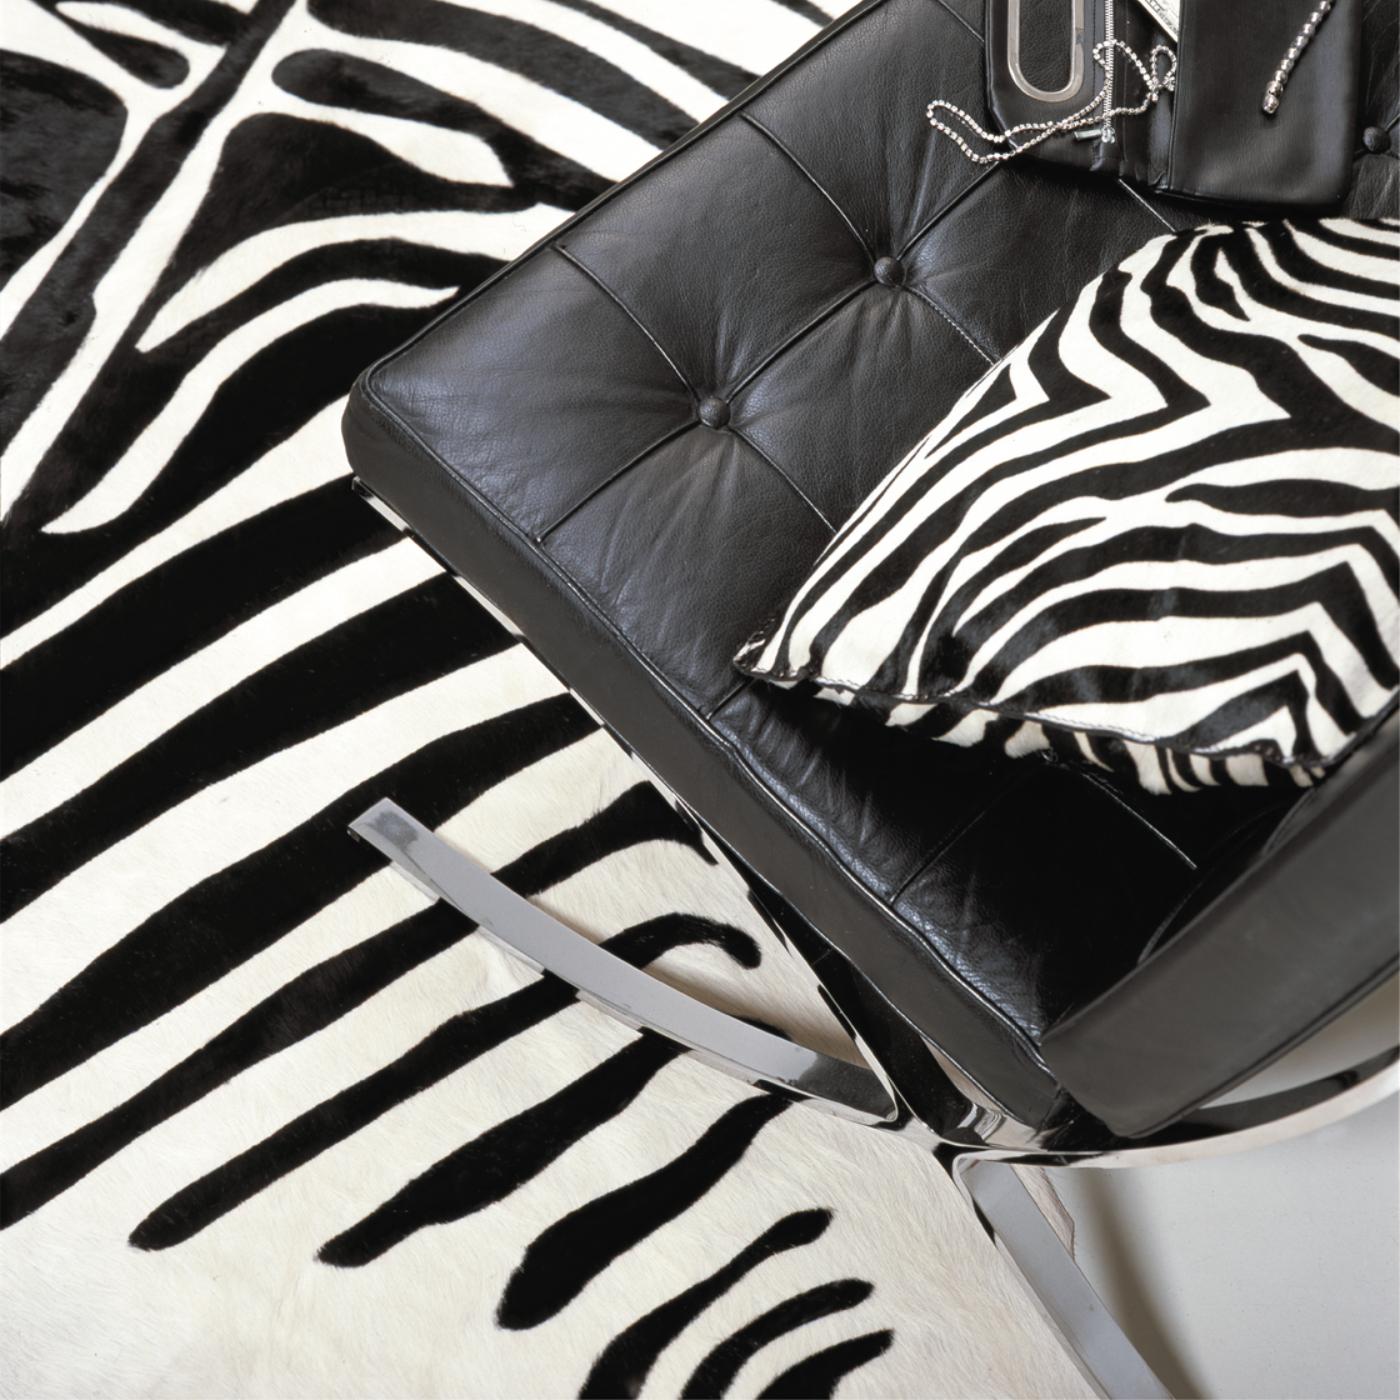 Pony-look finishing cow leather carpet with animal shape, zebra print and colored background.